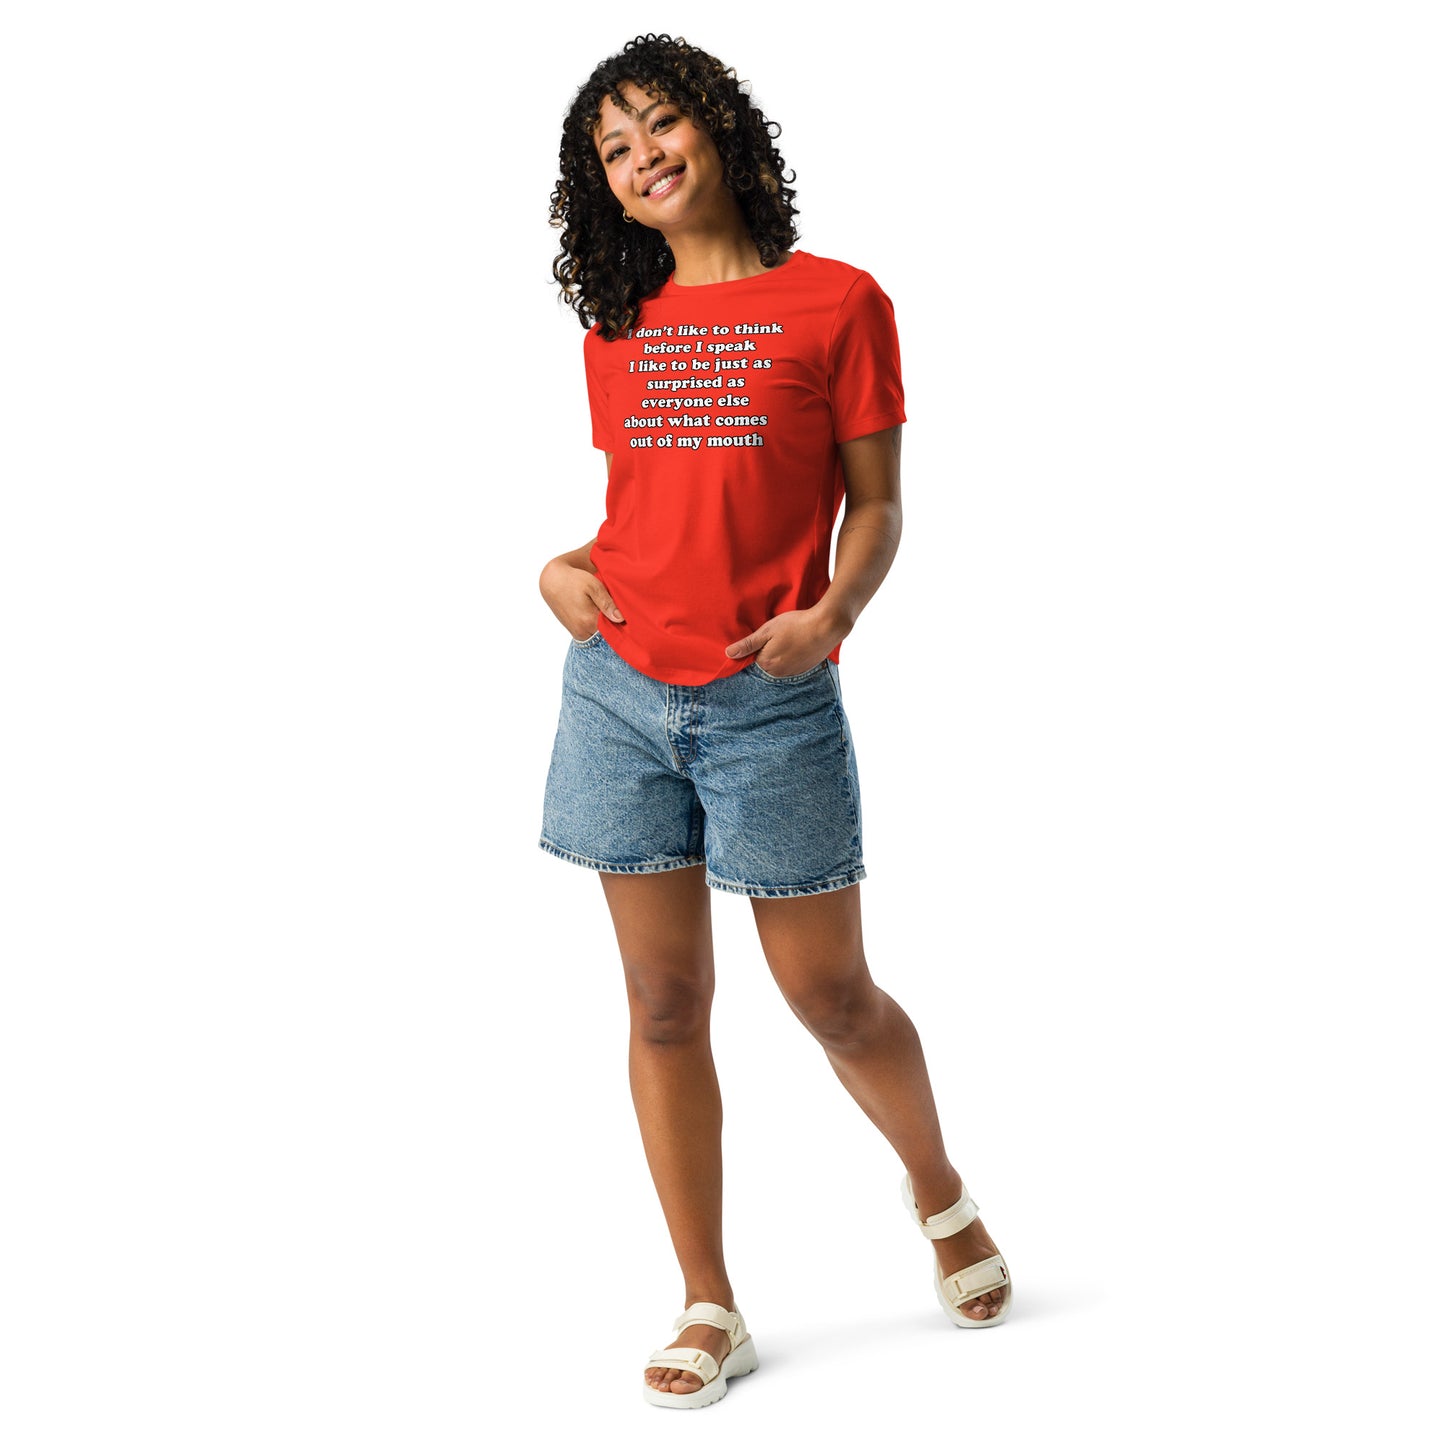 Woman with poppy t-shirt with text “I don't think before I speak Just as serprised as everyone about what comes out of my mouth"